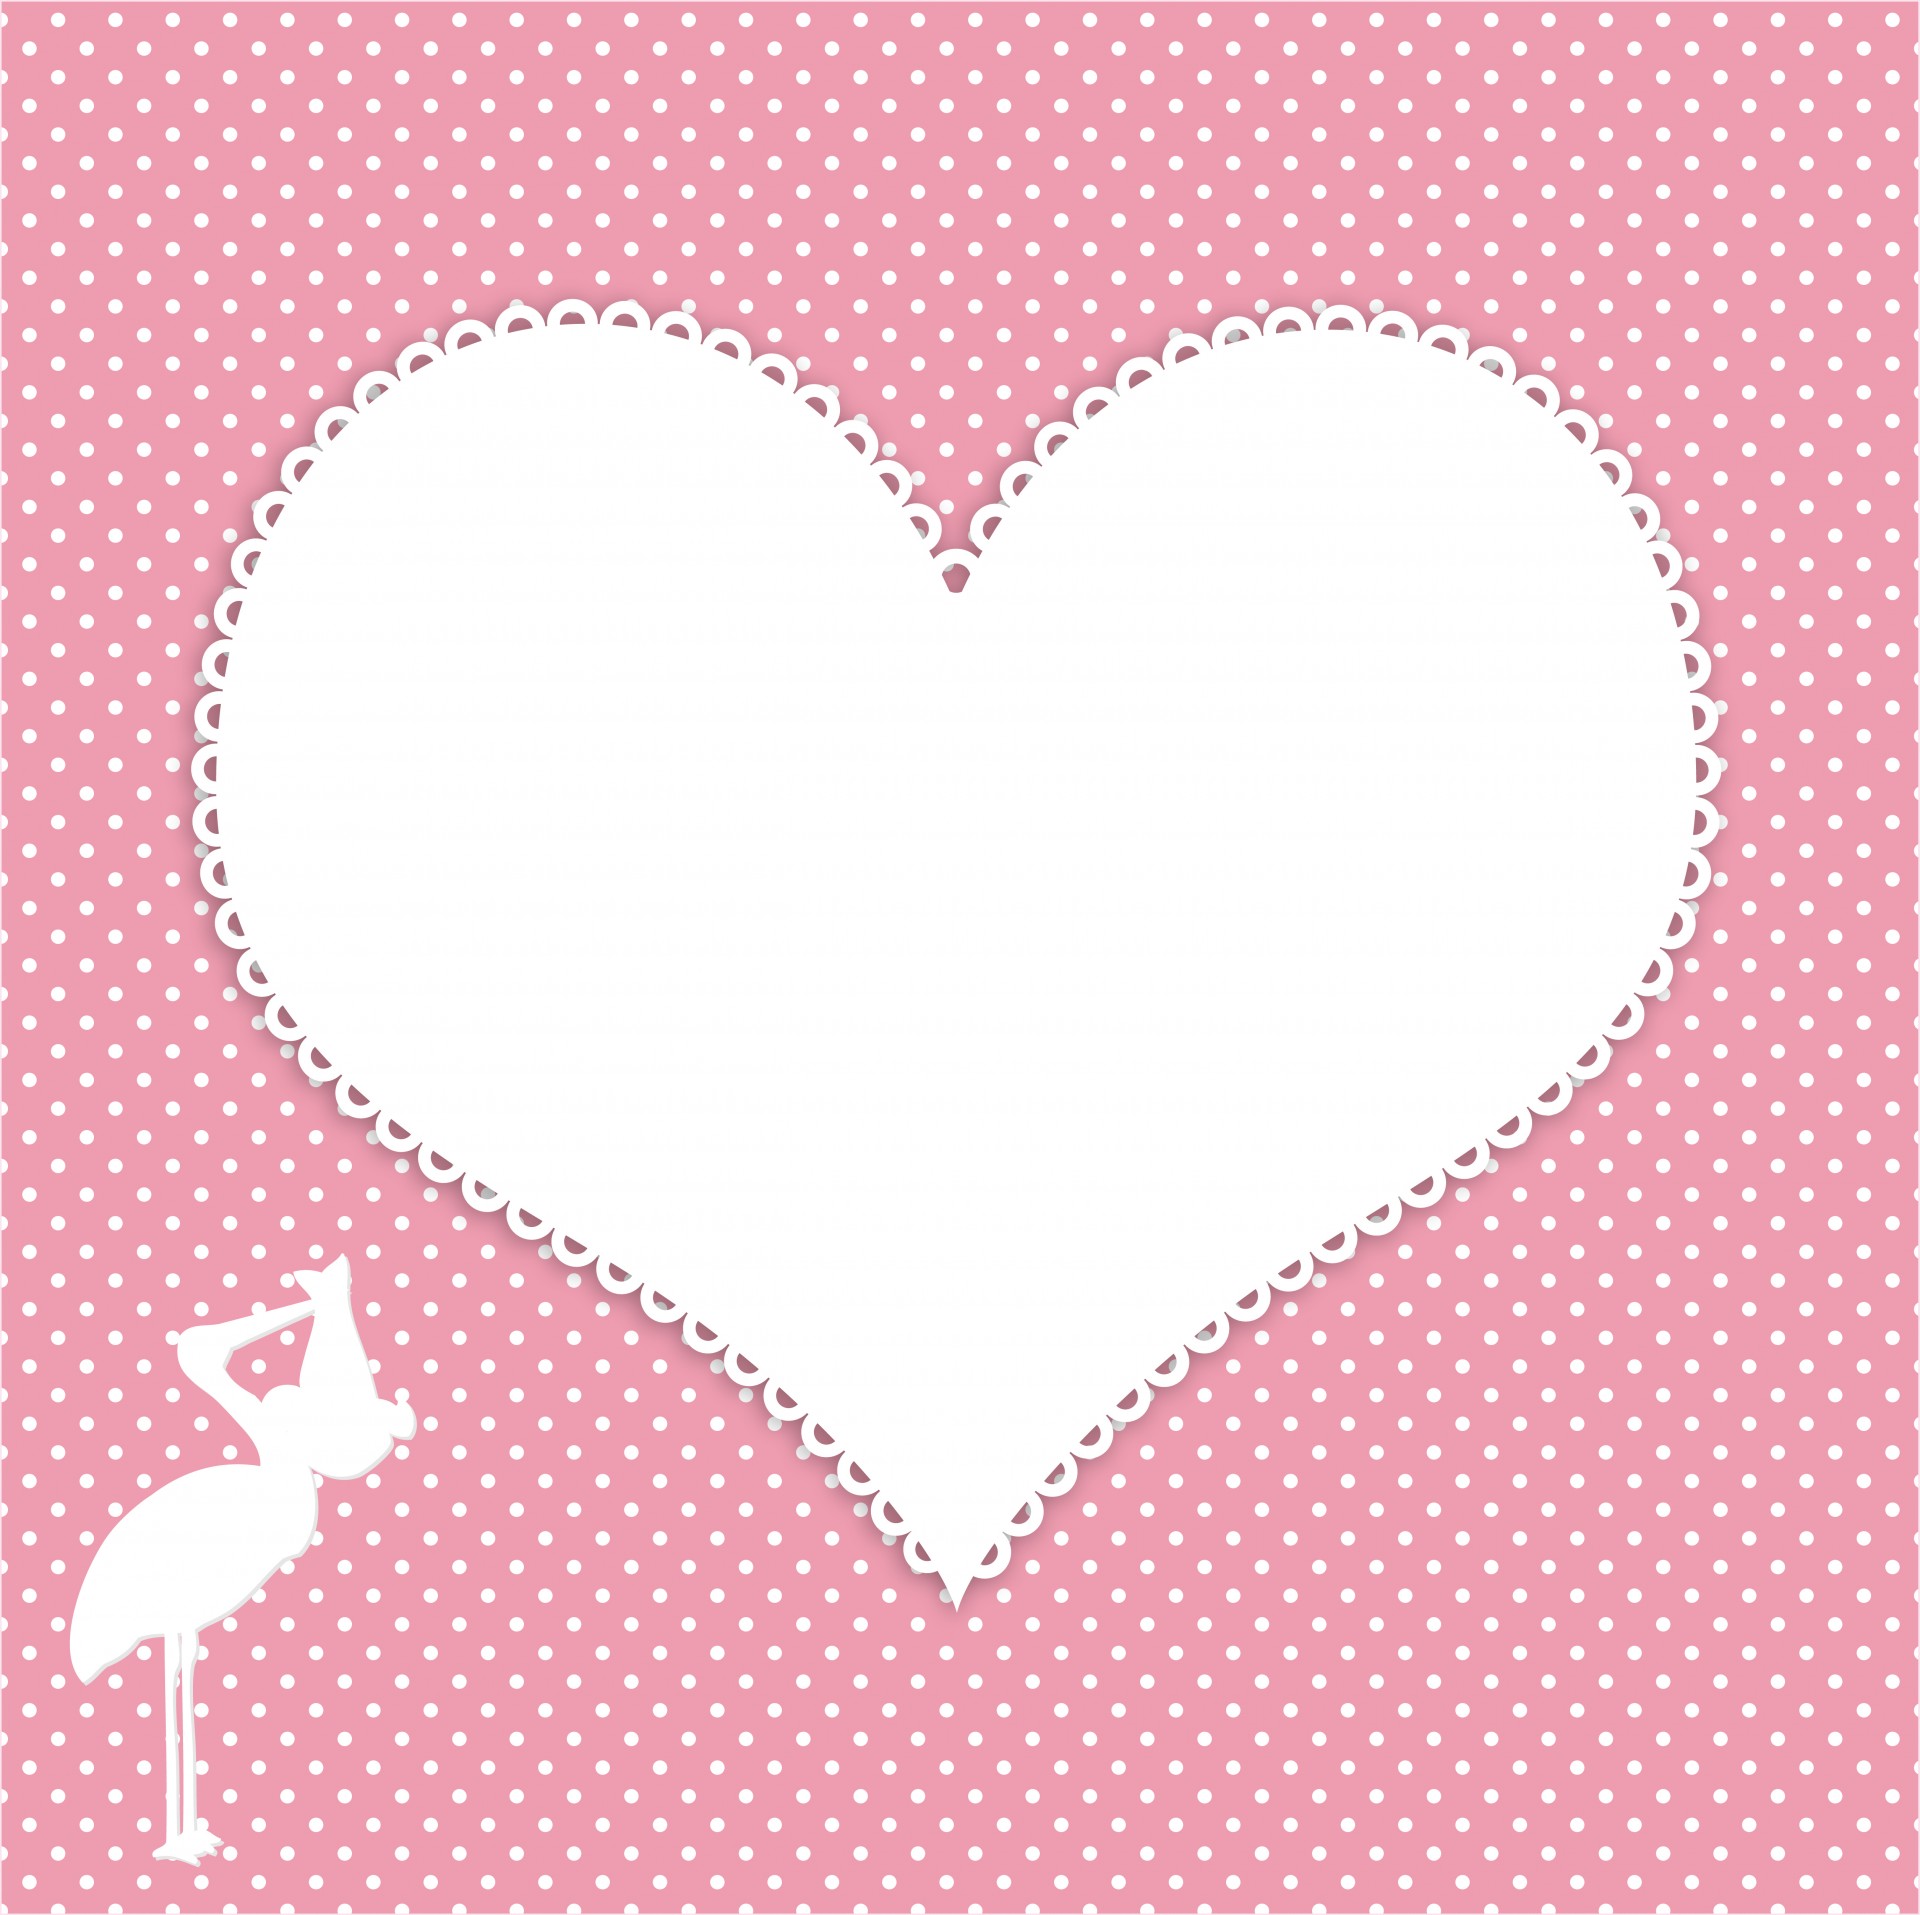 Stork with baby girl and white heart on pink polka dots background for scrapbooking